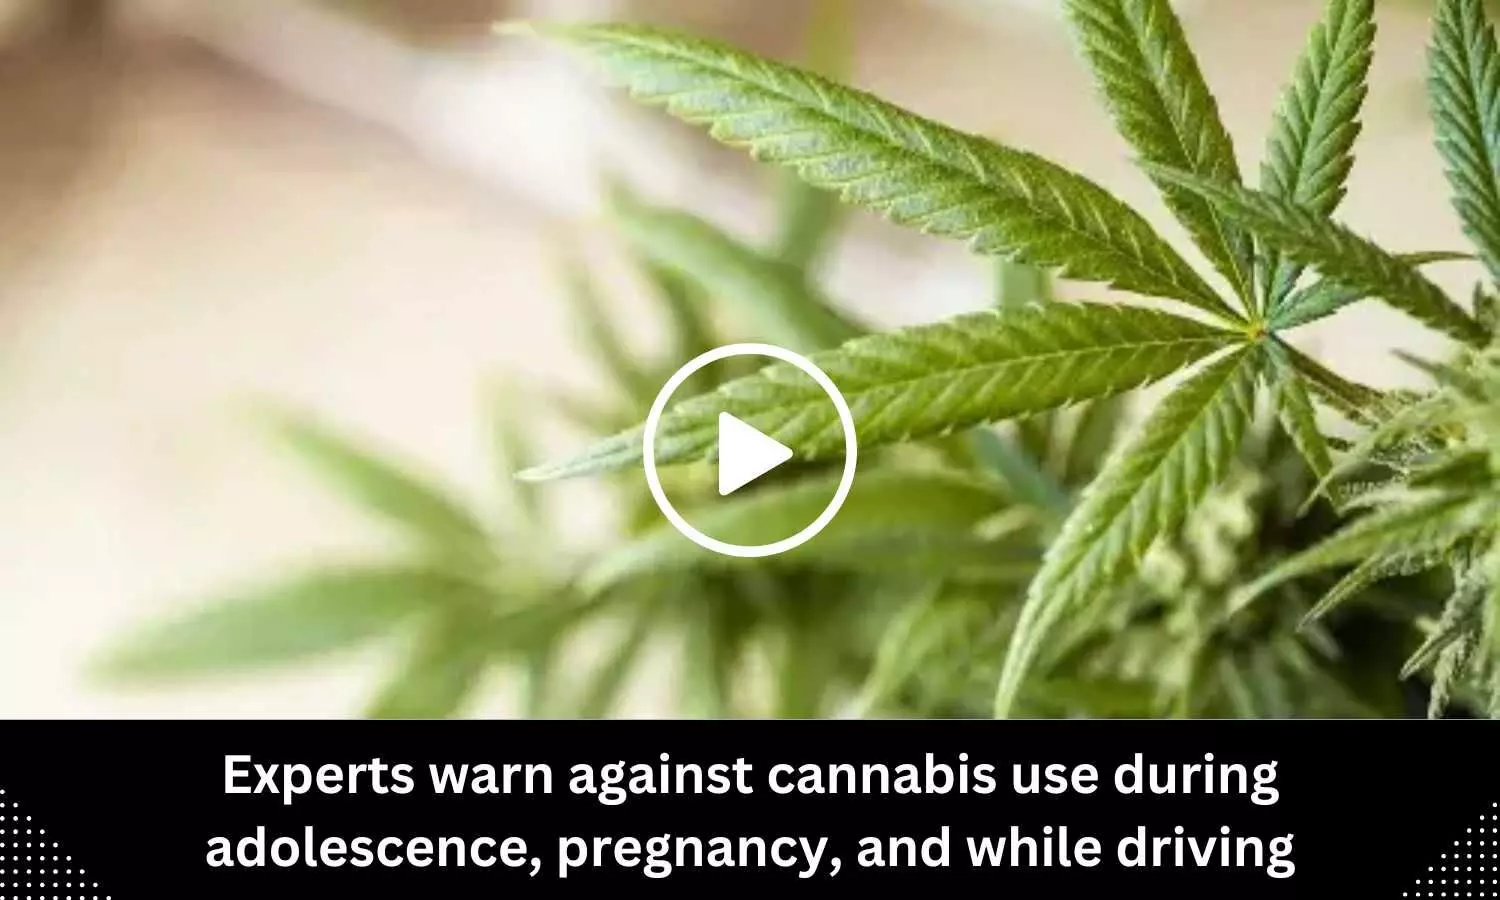 Experts warn against cannabis use during adolescence, pregnancy, and while driving